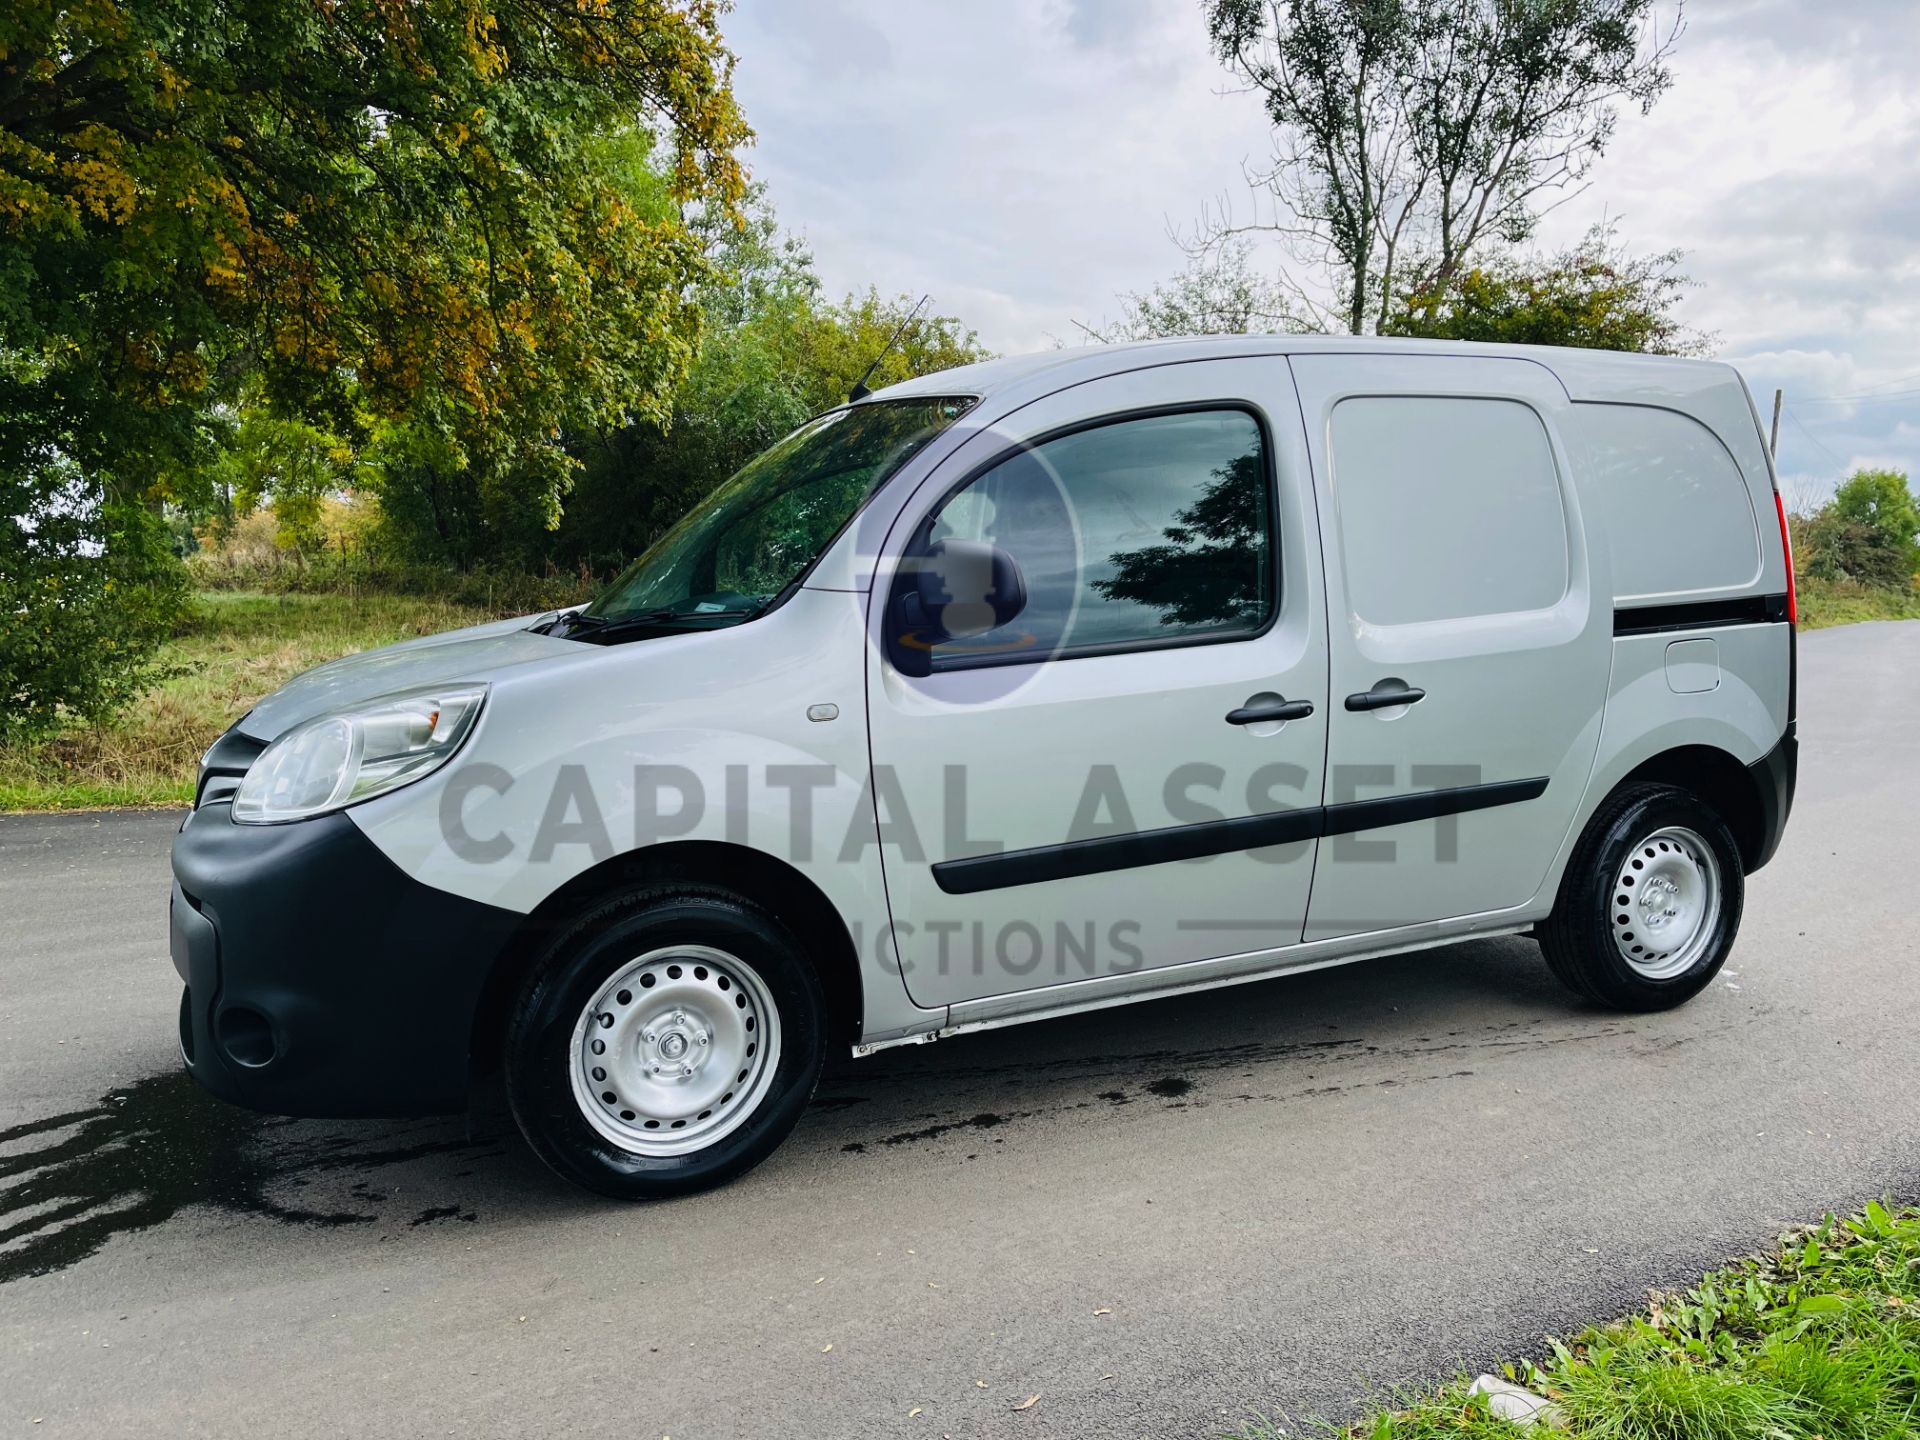 (ON SALE) RENAULT KANGOO 1.5DCI "BUSINESS EDITION" FSH (18 YEAR) EURO (AC) ELEC PACK TWIN SIDE DOORS - Image 7 of 22